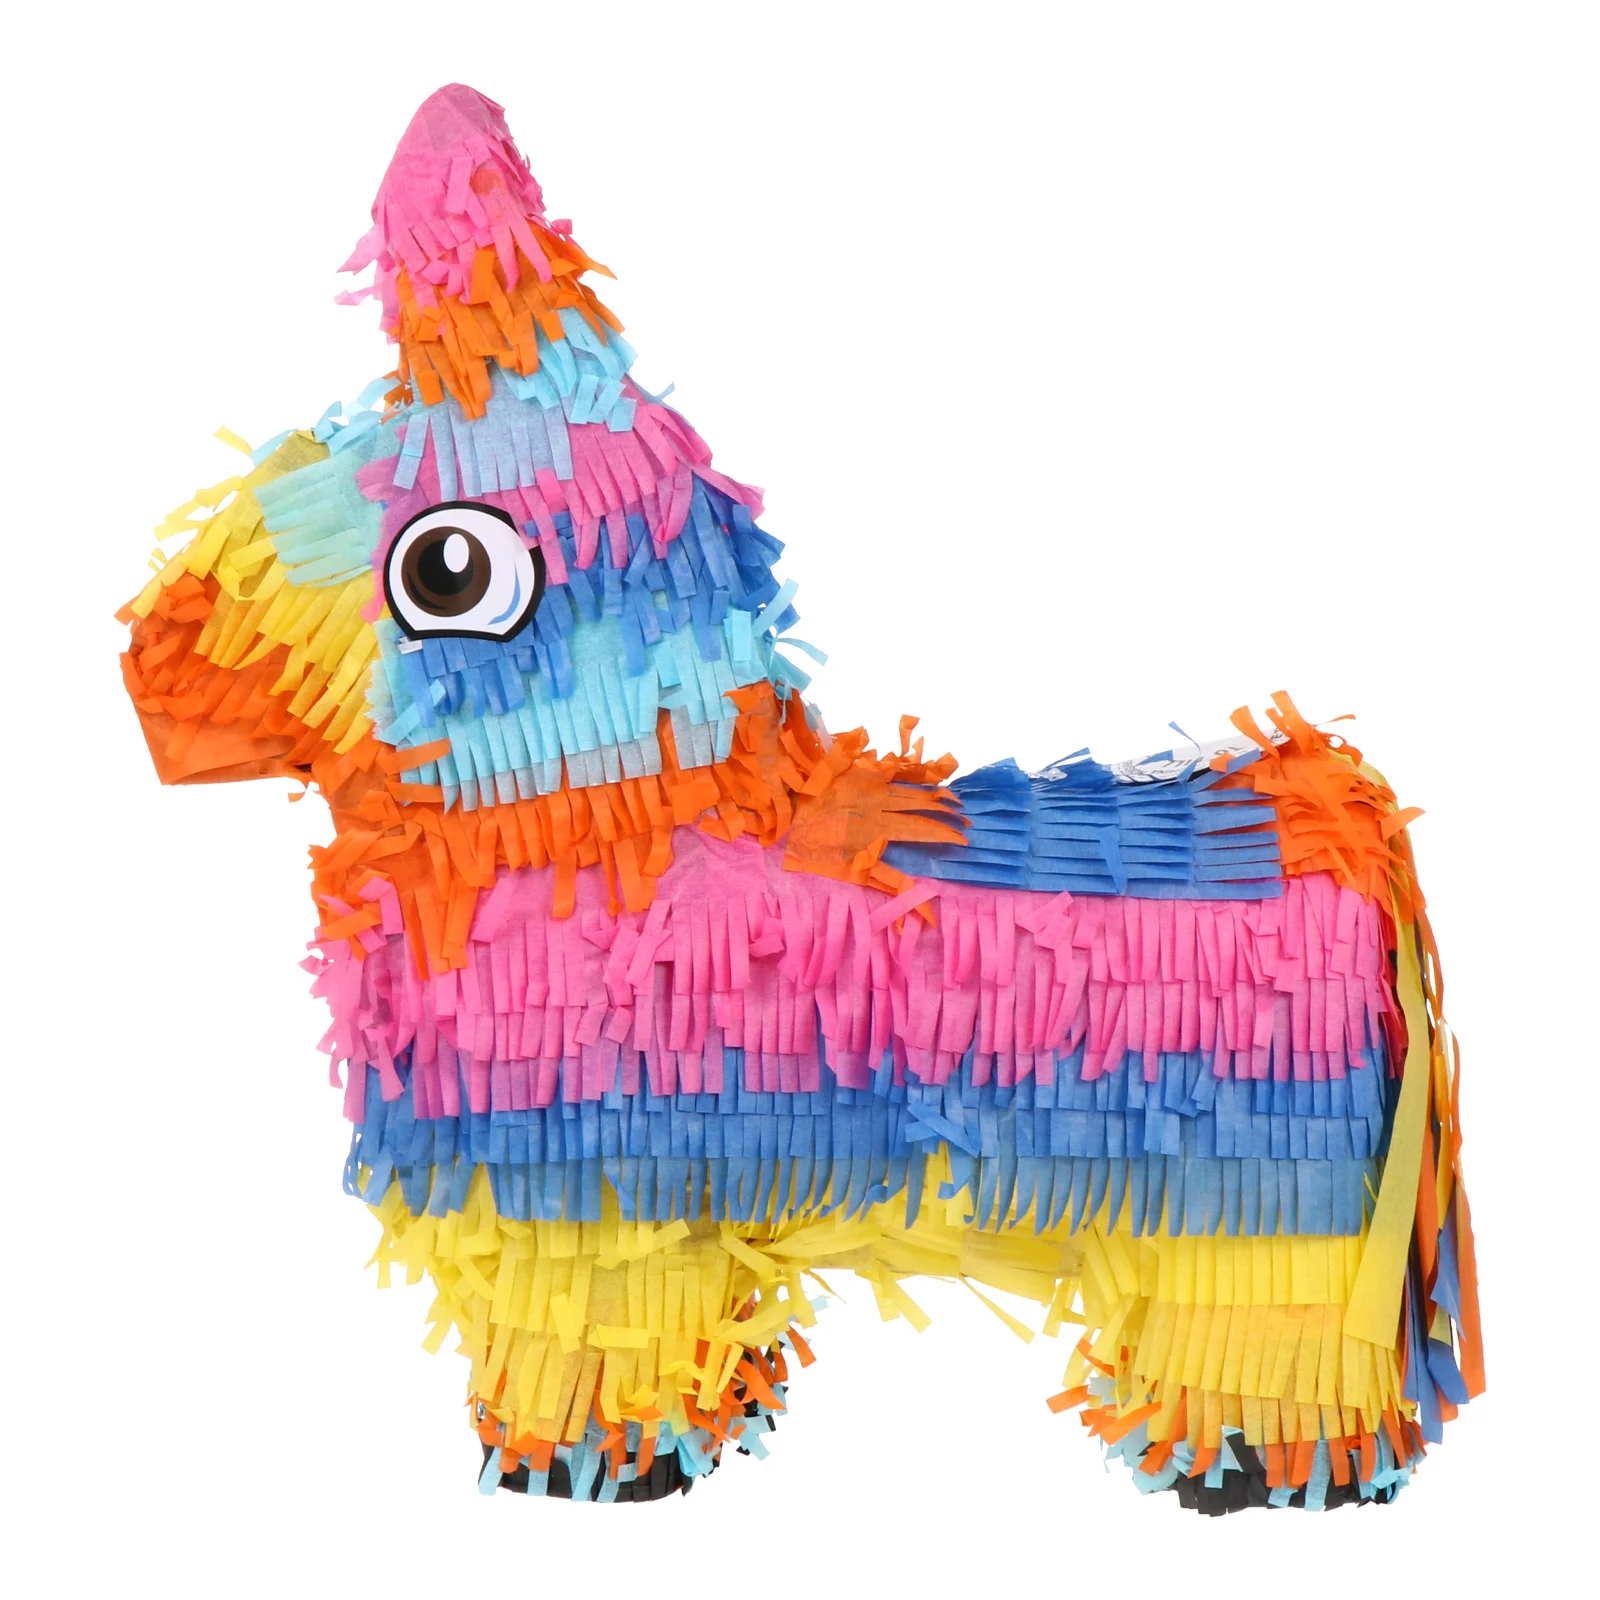 

Childrens Toys Pony Pinata Children's Paper Three-dimensional Horse Shaped Sugar Filled Plaything Hit Party favors for kids